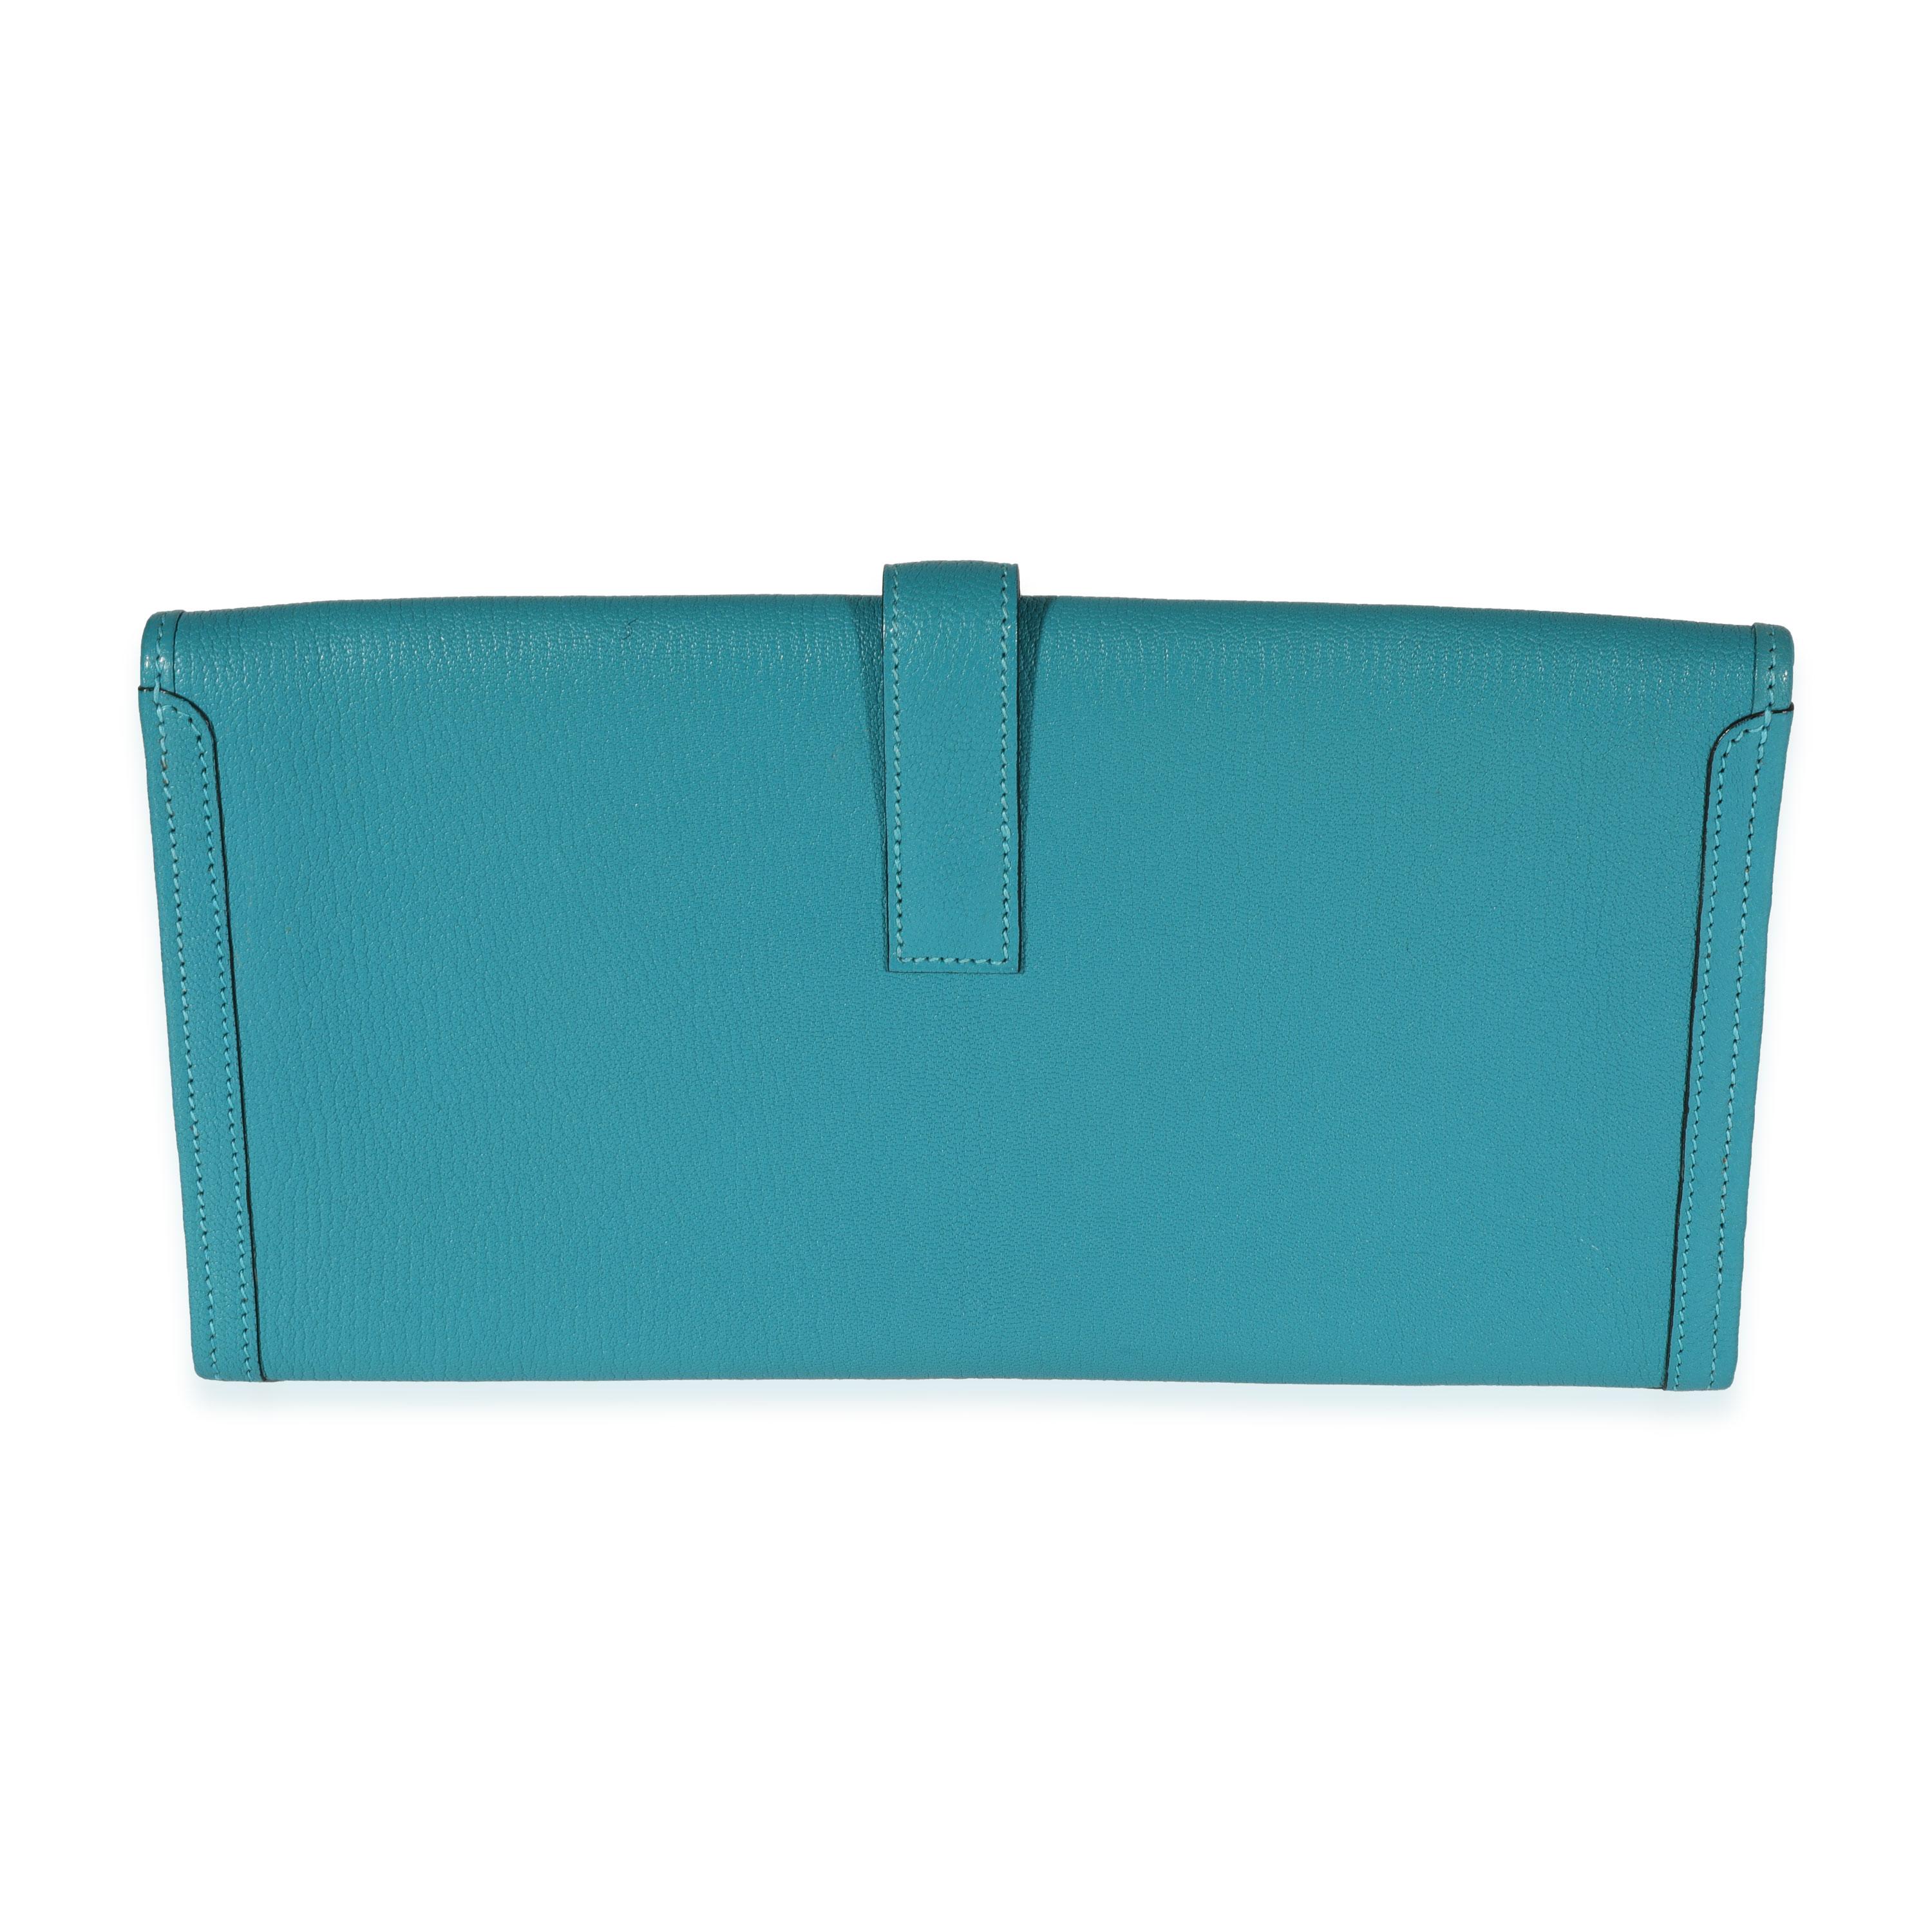 Listing Title: Hermès Turquoise Chévre Jige Elan 29
SKU: 121376
Condition: Pre-owned 
Handbag Condition: Very Good
Condition Comments: Very Good Condition. Light scuffing to corners.  Light scuffing and marks too interior. No other visible signs of